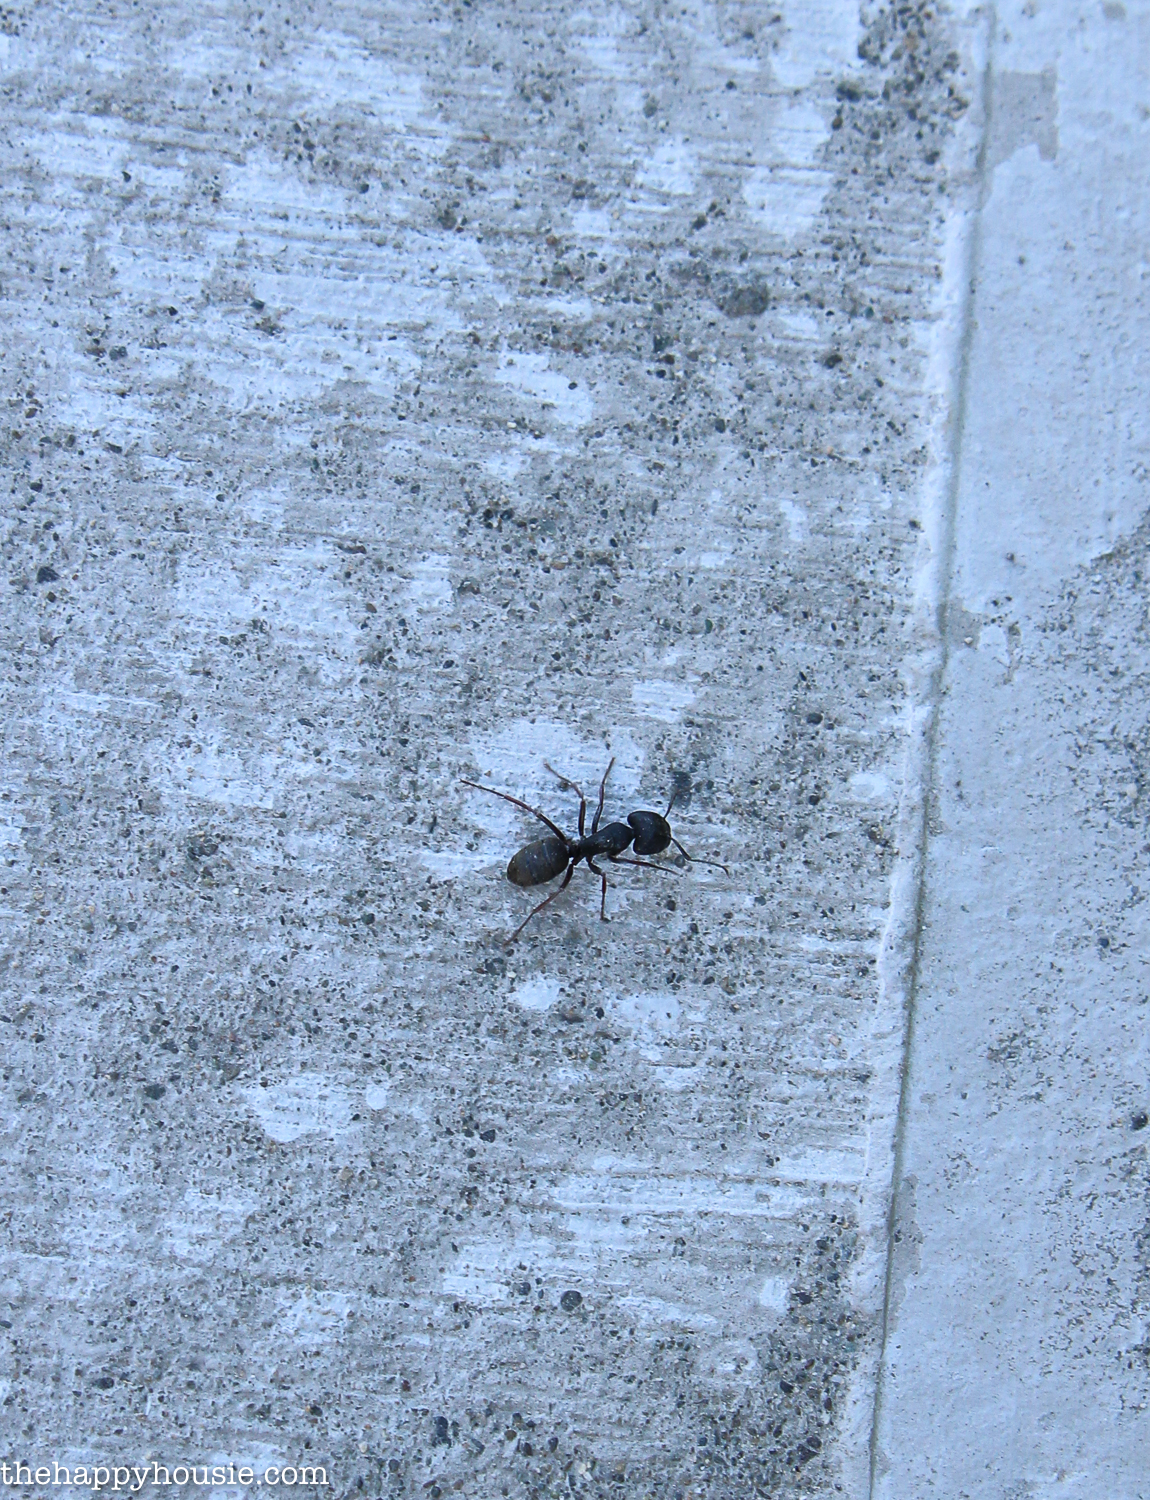 A black ant on the concrete.